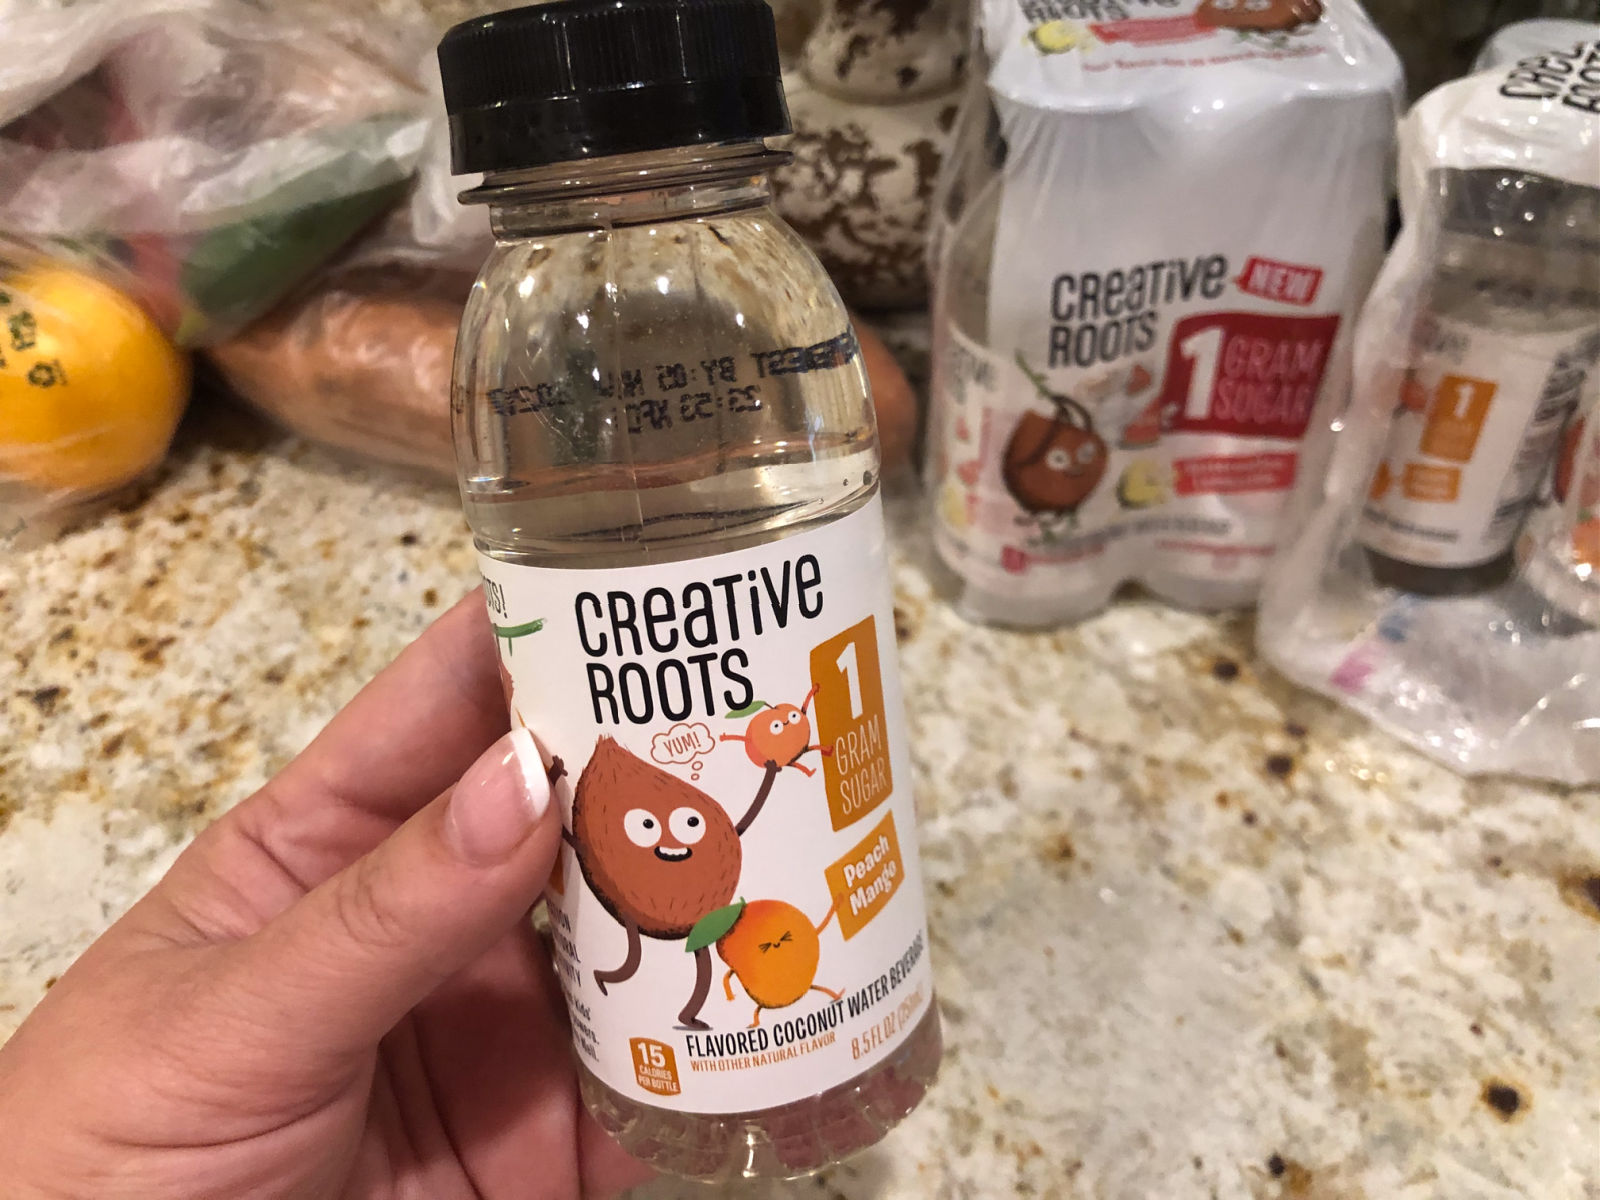 All Four Varieties Of Creative Roots Coconut Water Drinks Are BOGO At Publix! on I Heart Publix